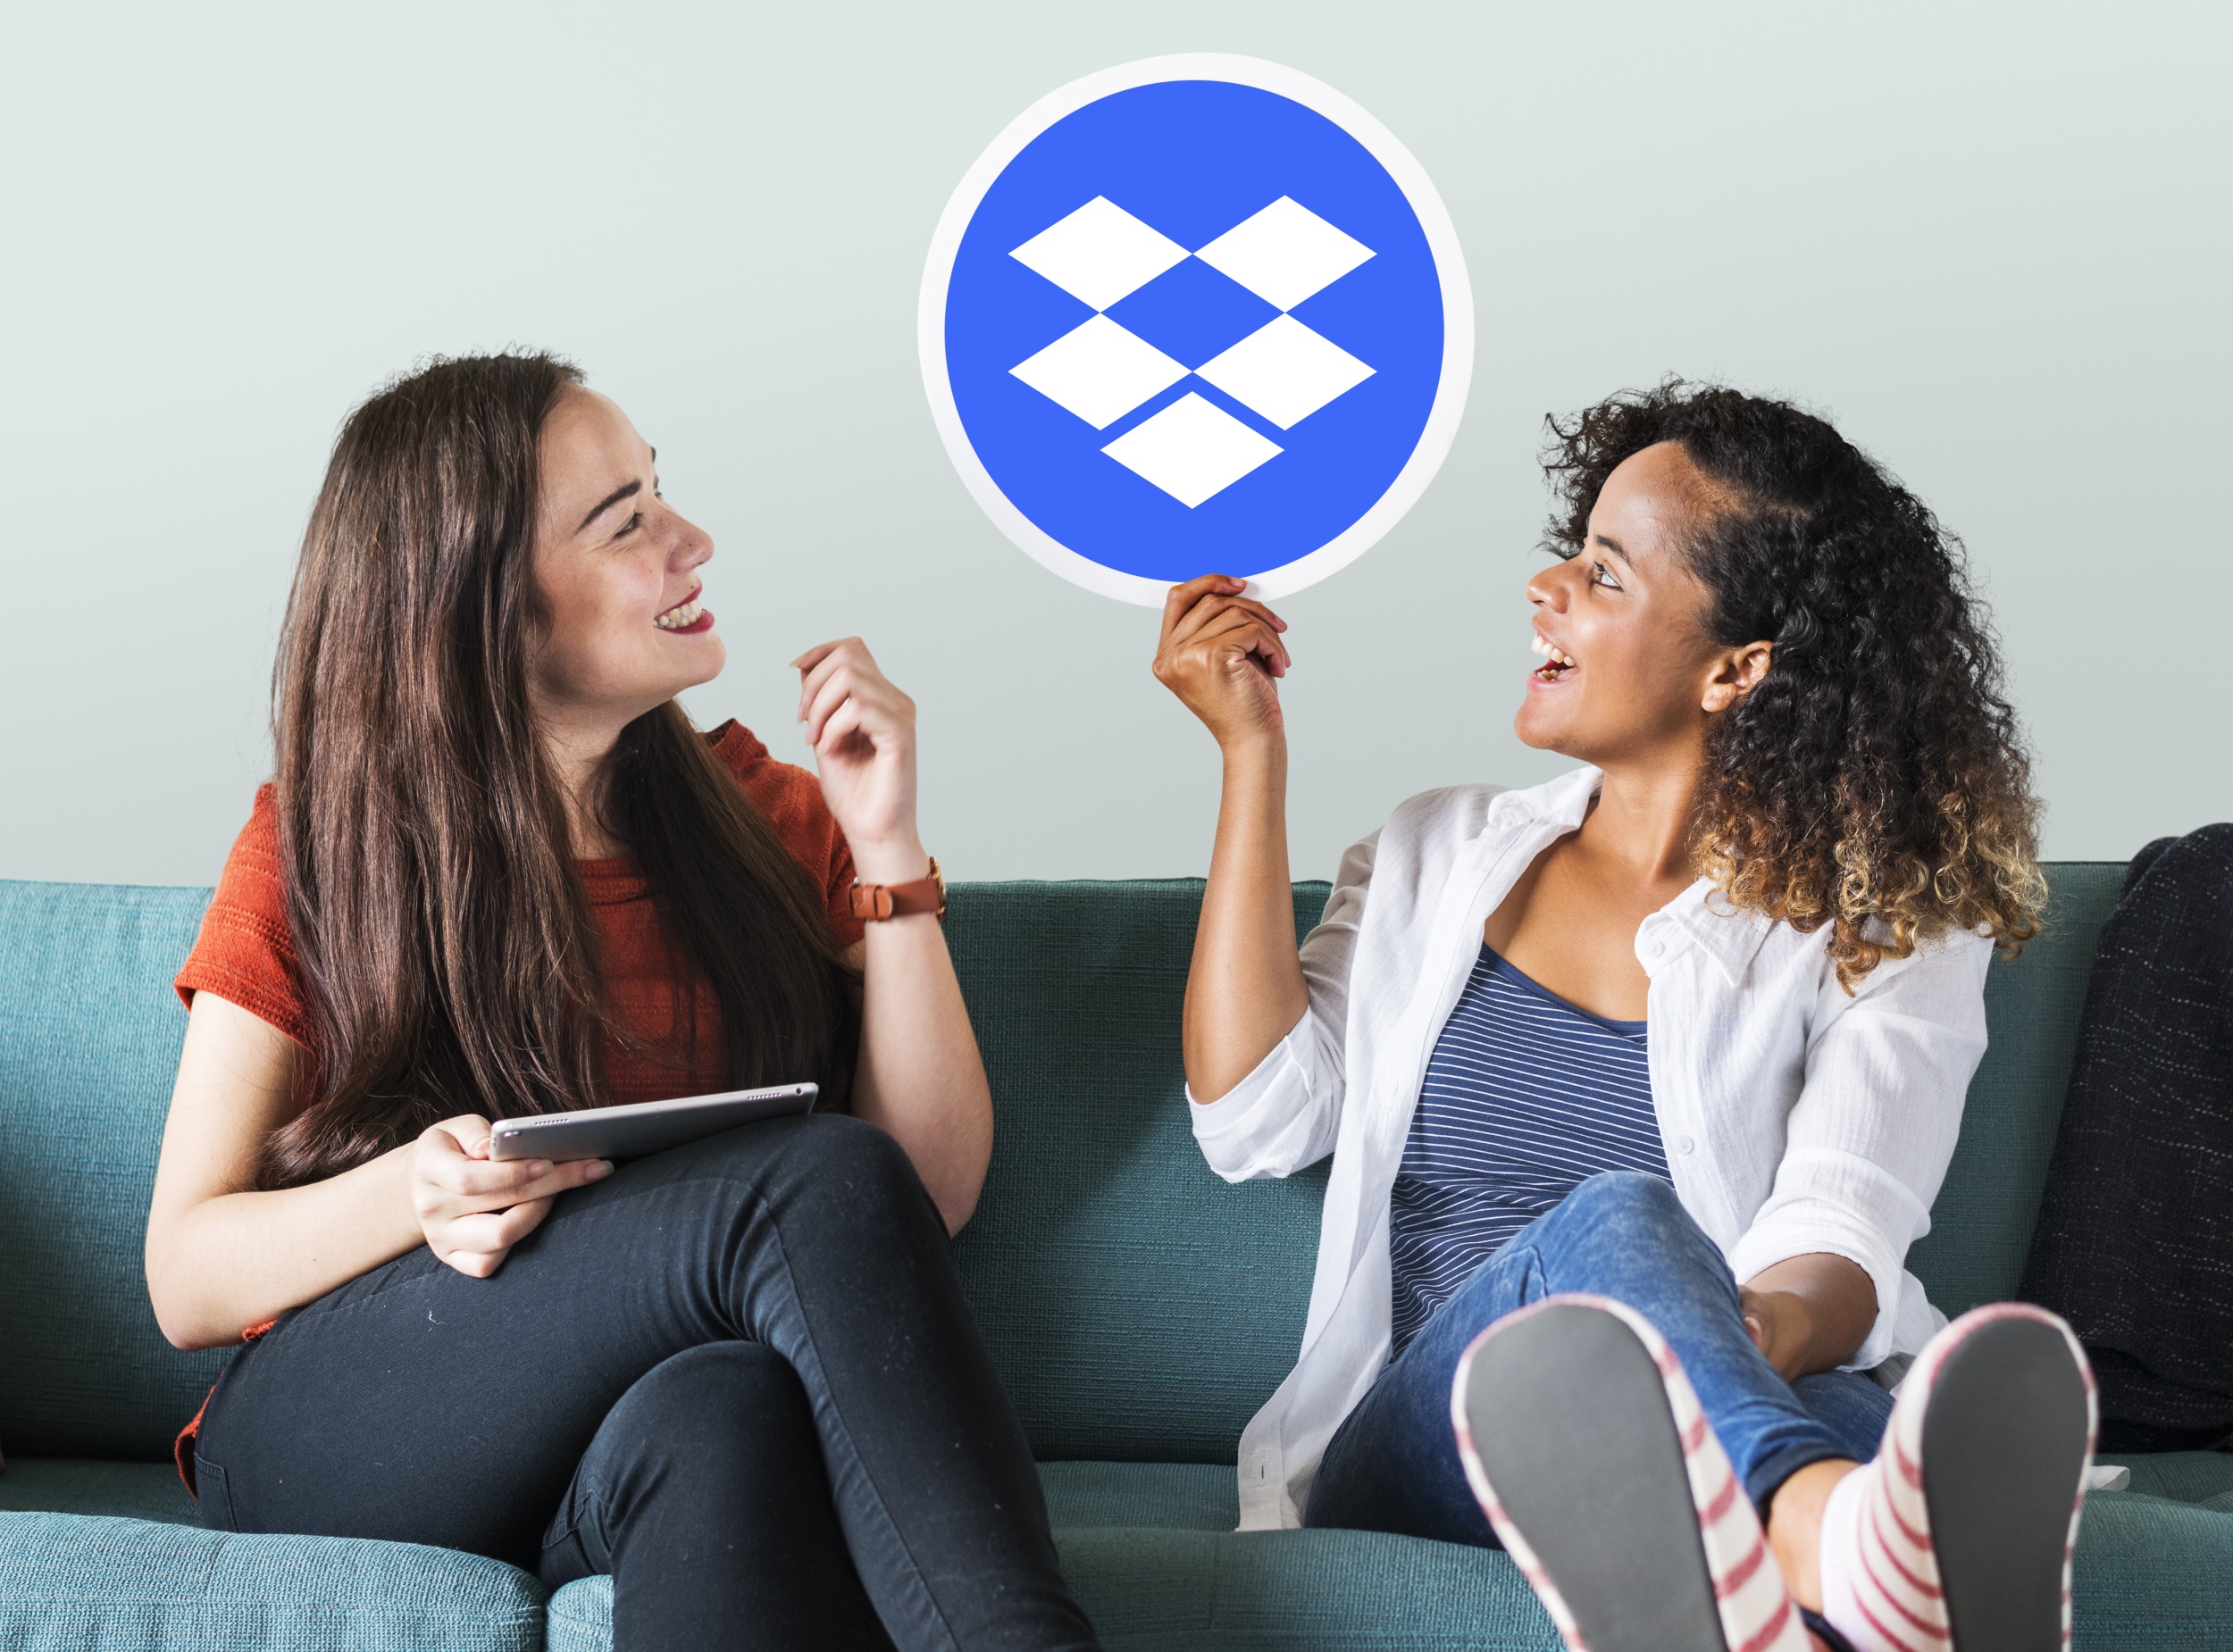 Dropbox Sign Hack: What You Need to Know